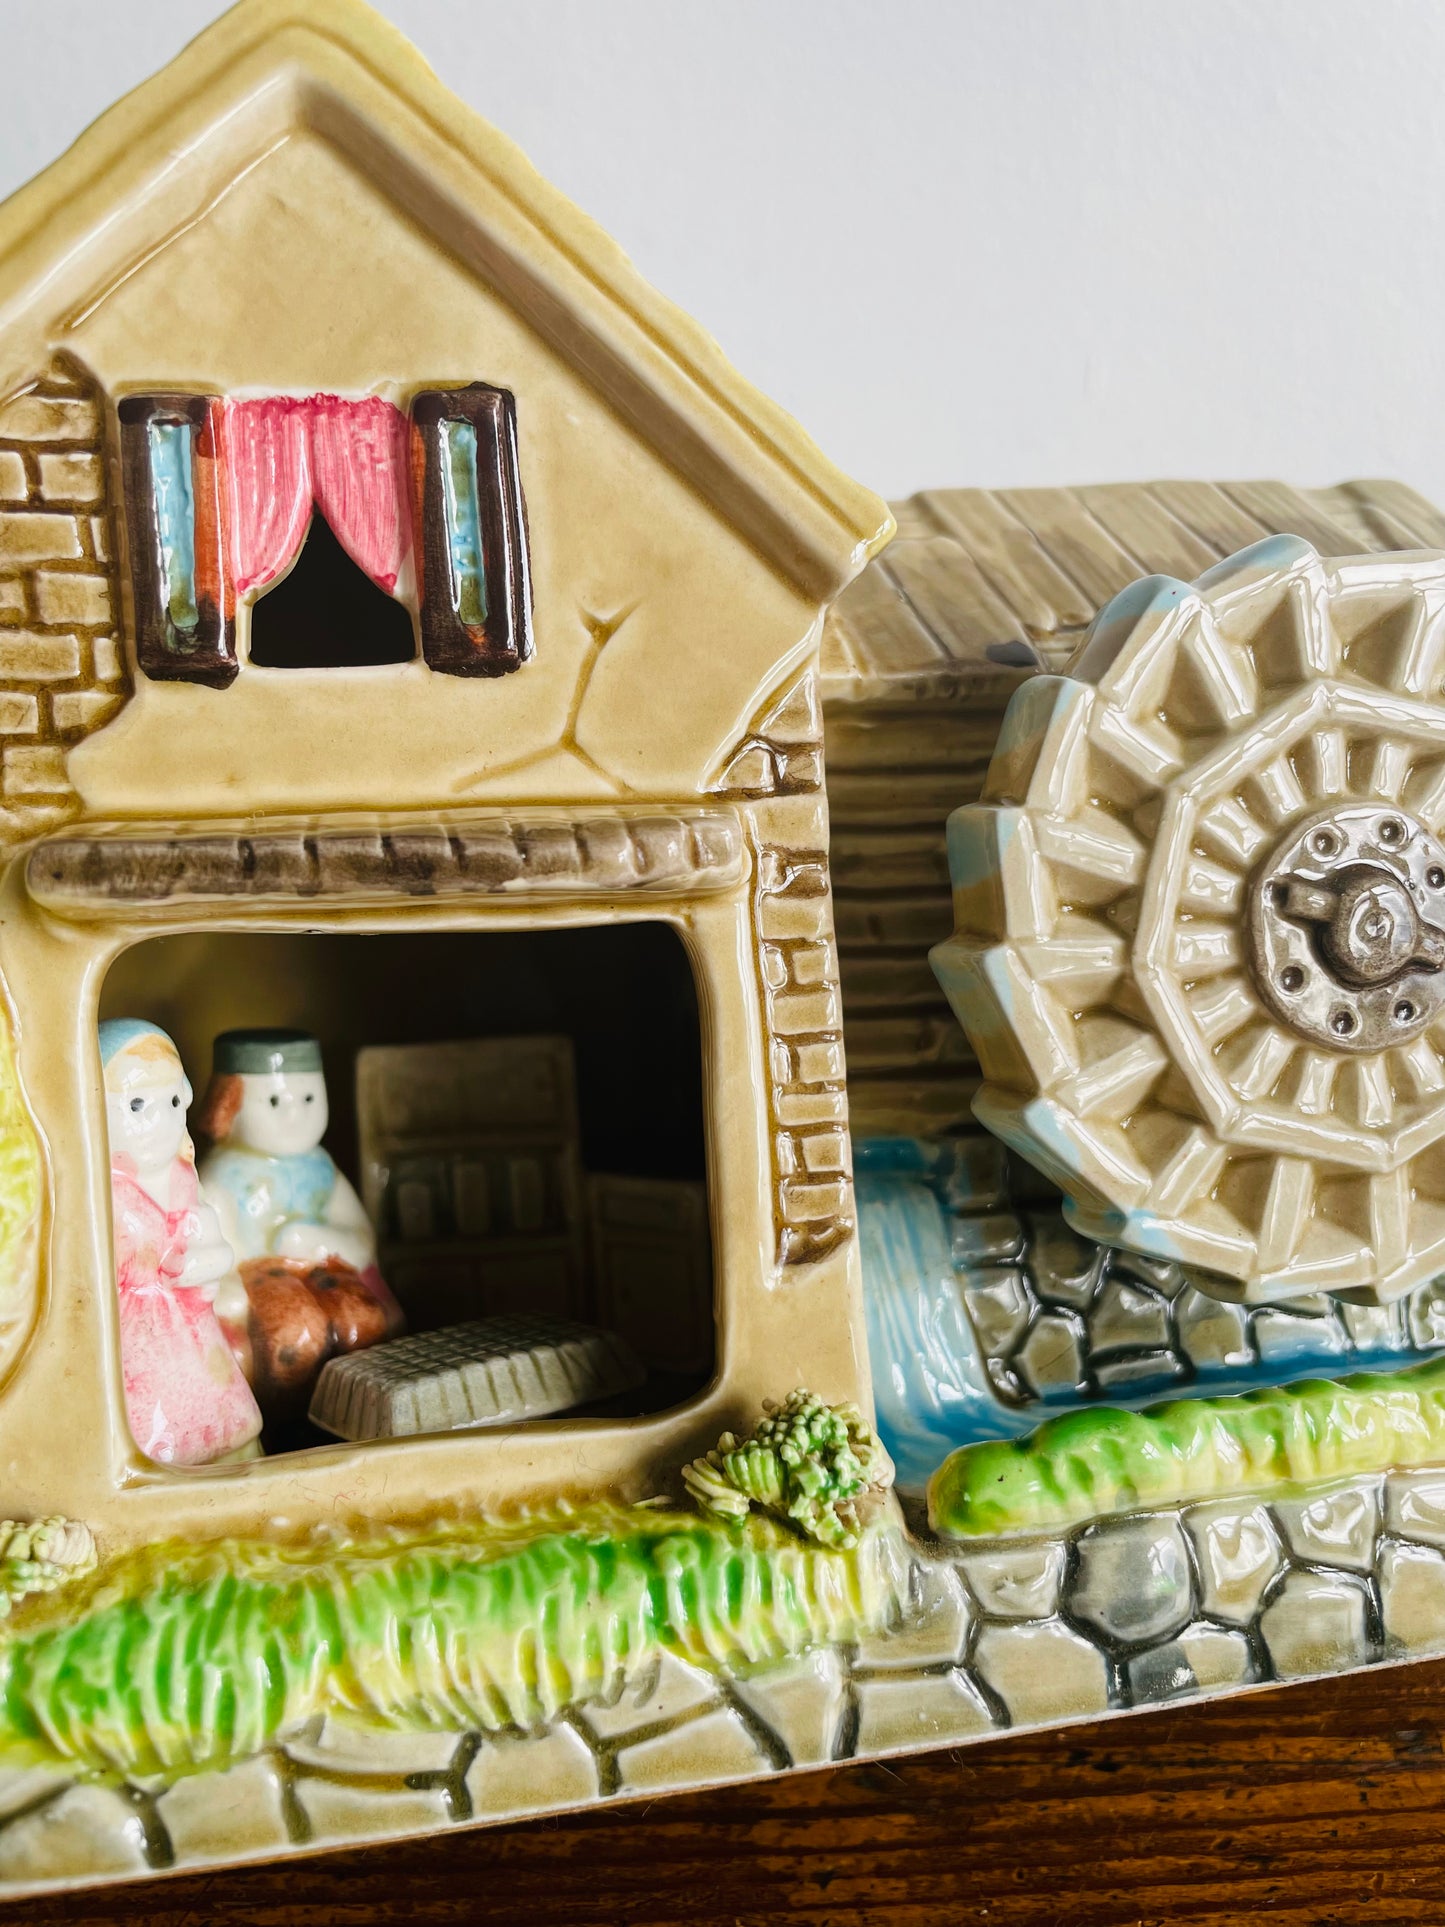 Watermill Cottage House with Dutch People Music Box - Made in Japan